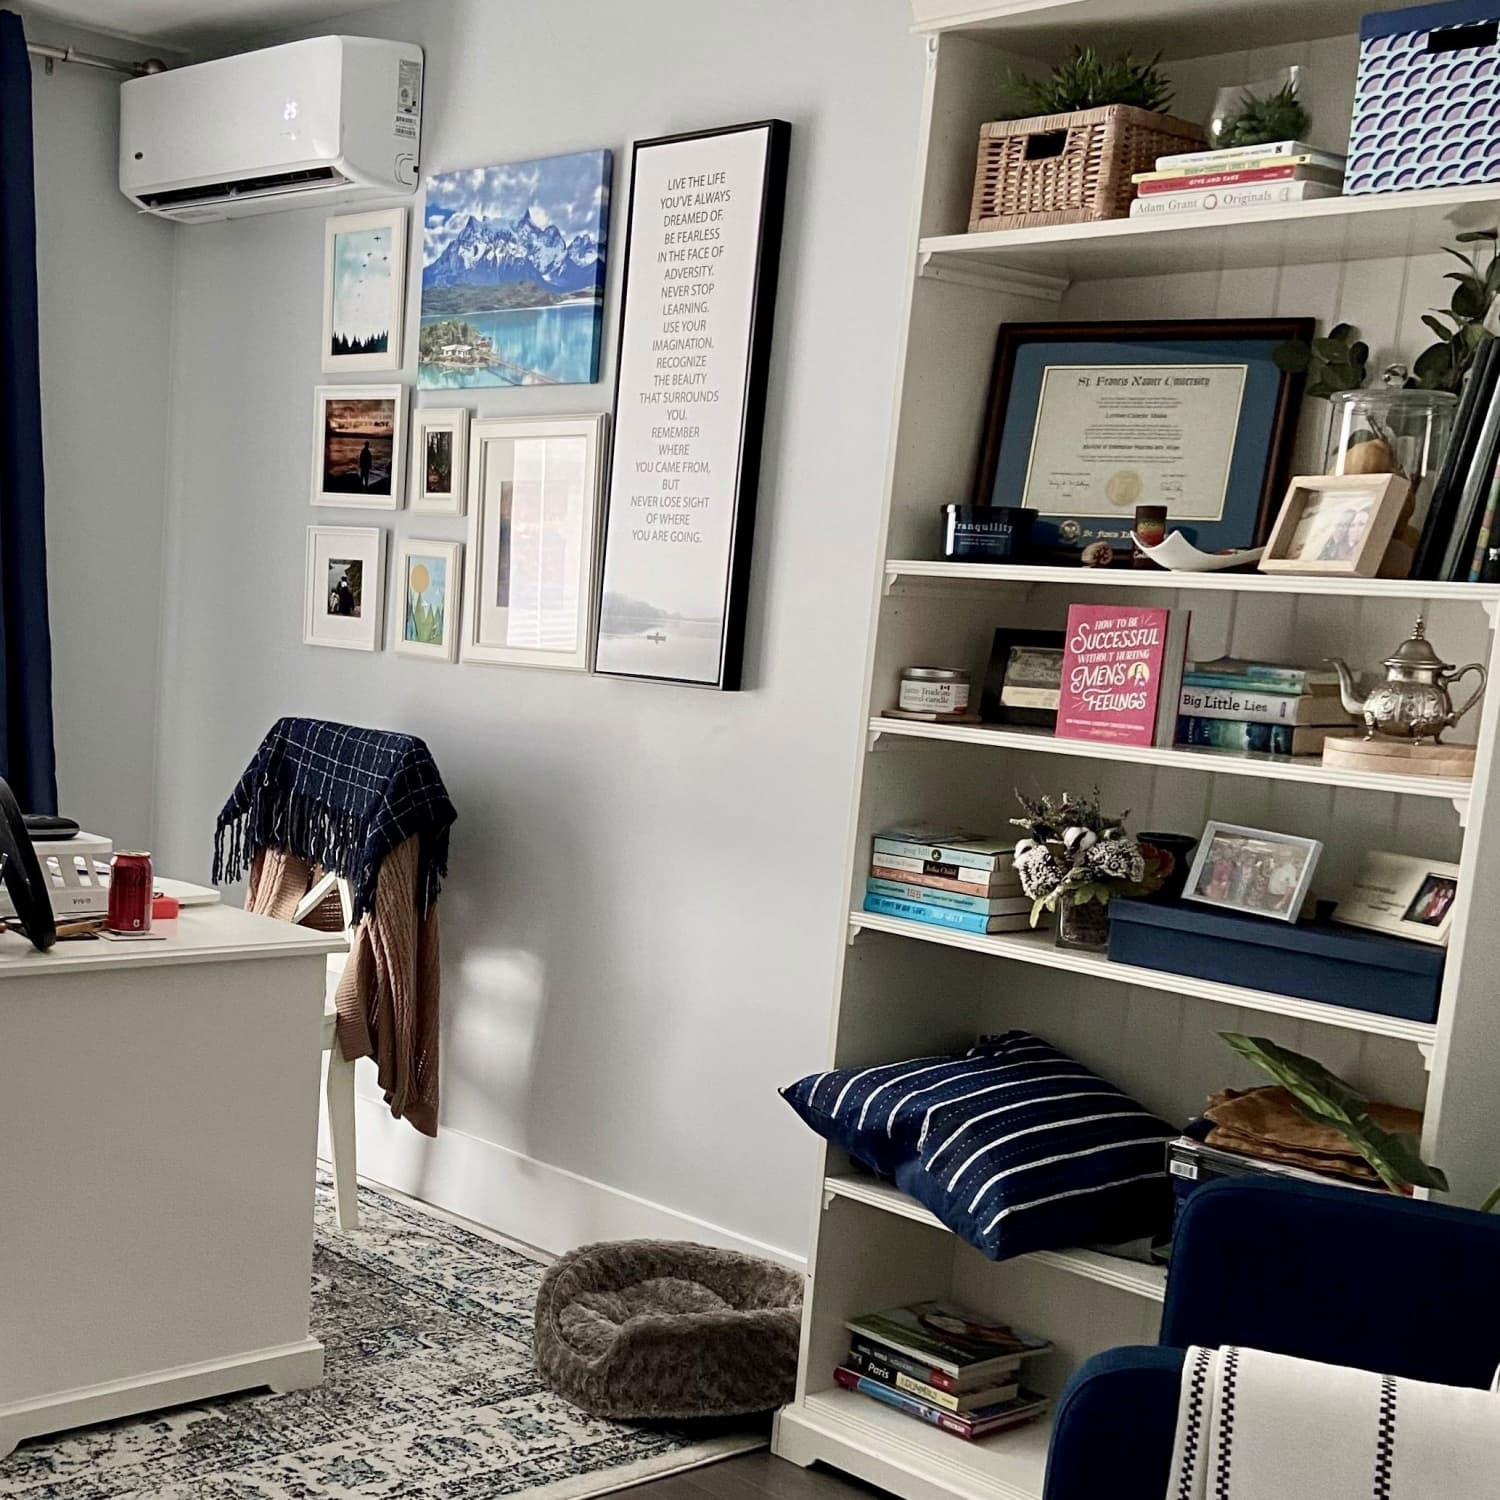 A home-office revamp with an IKEA desk hack